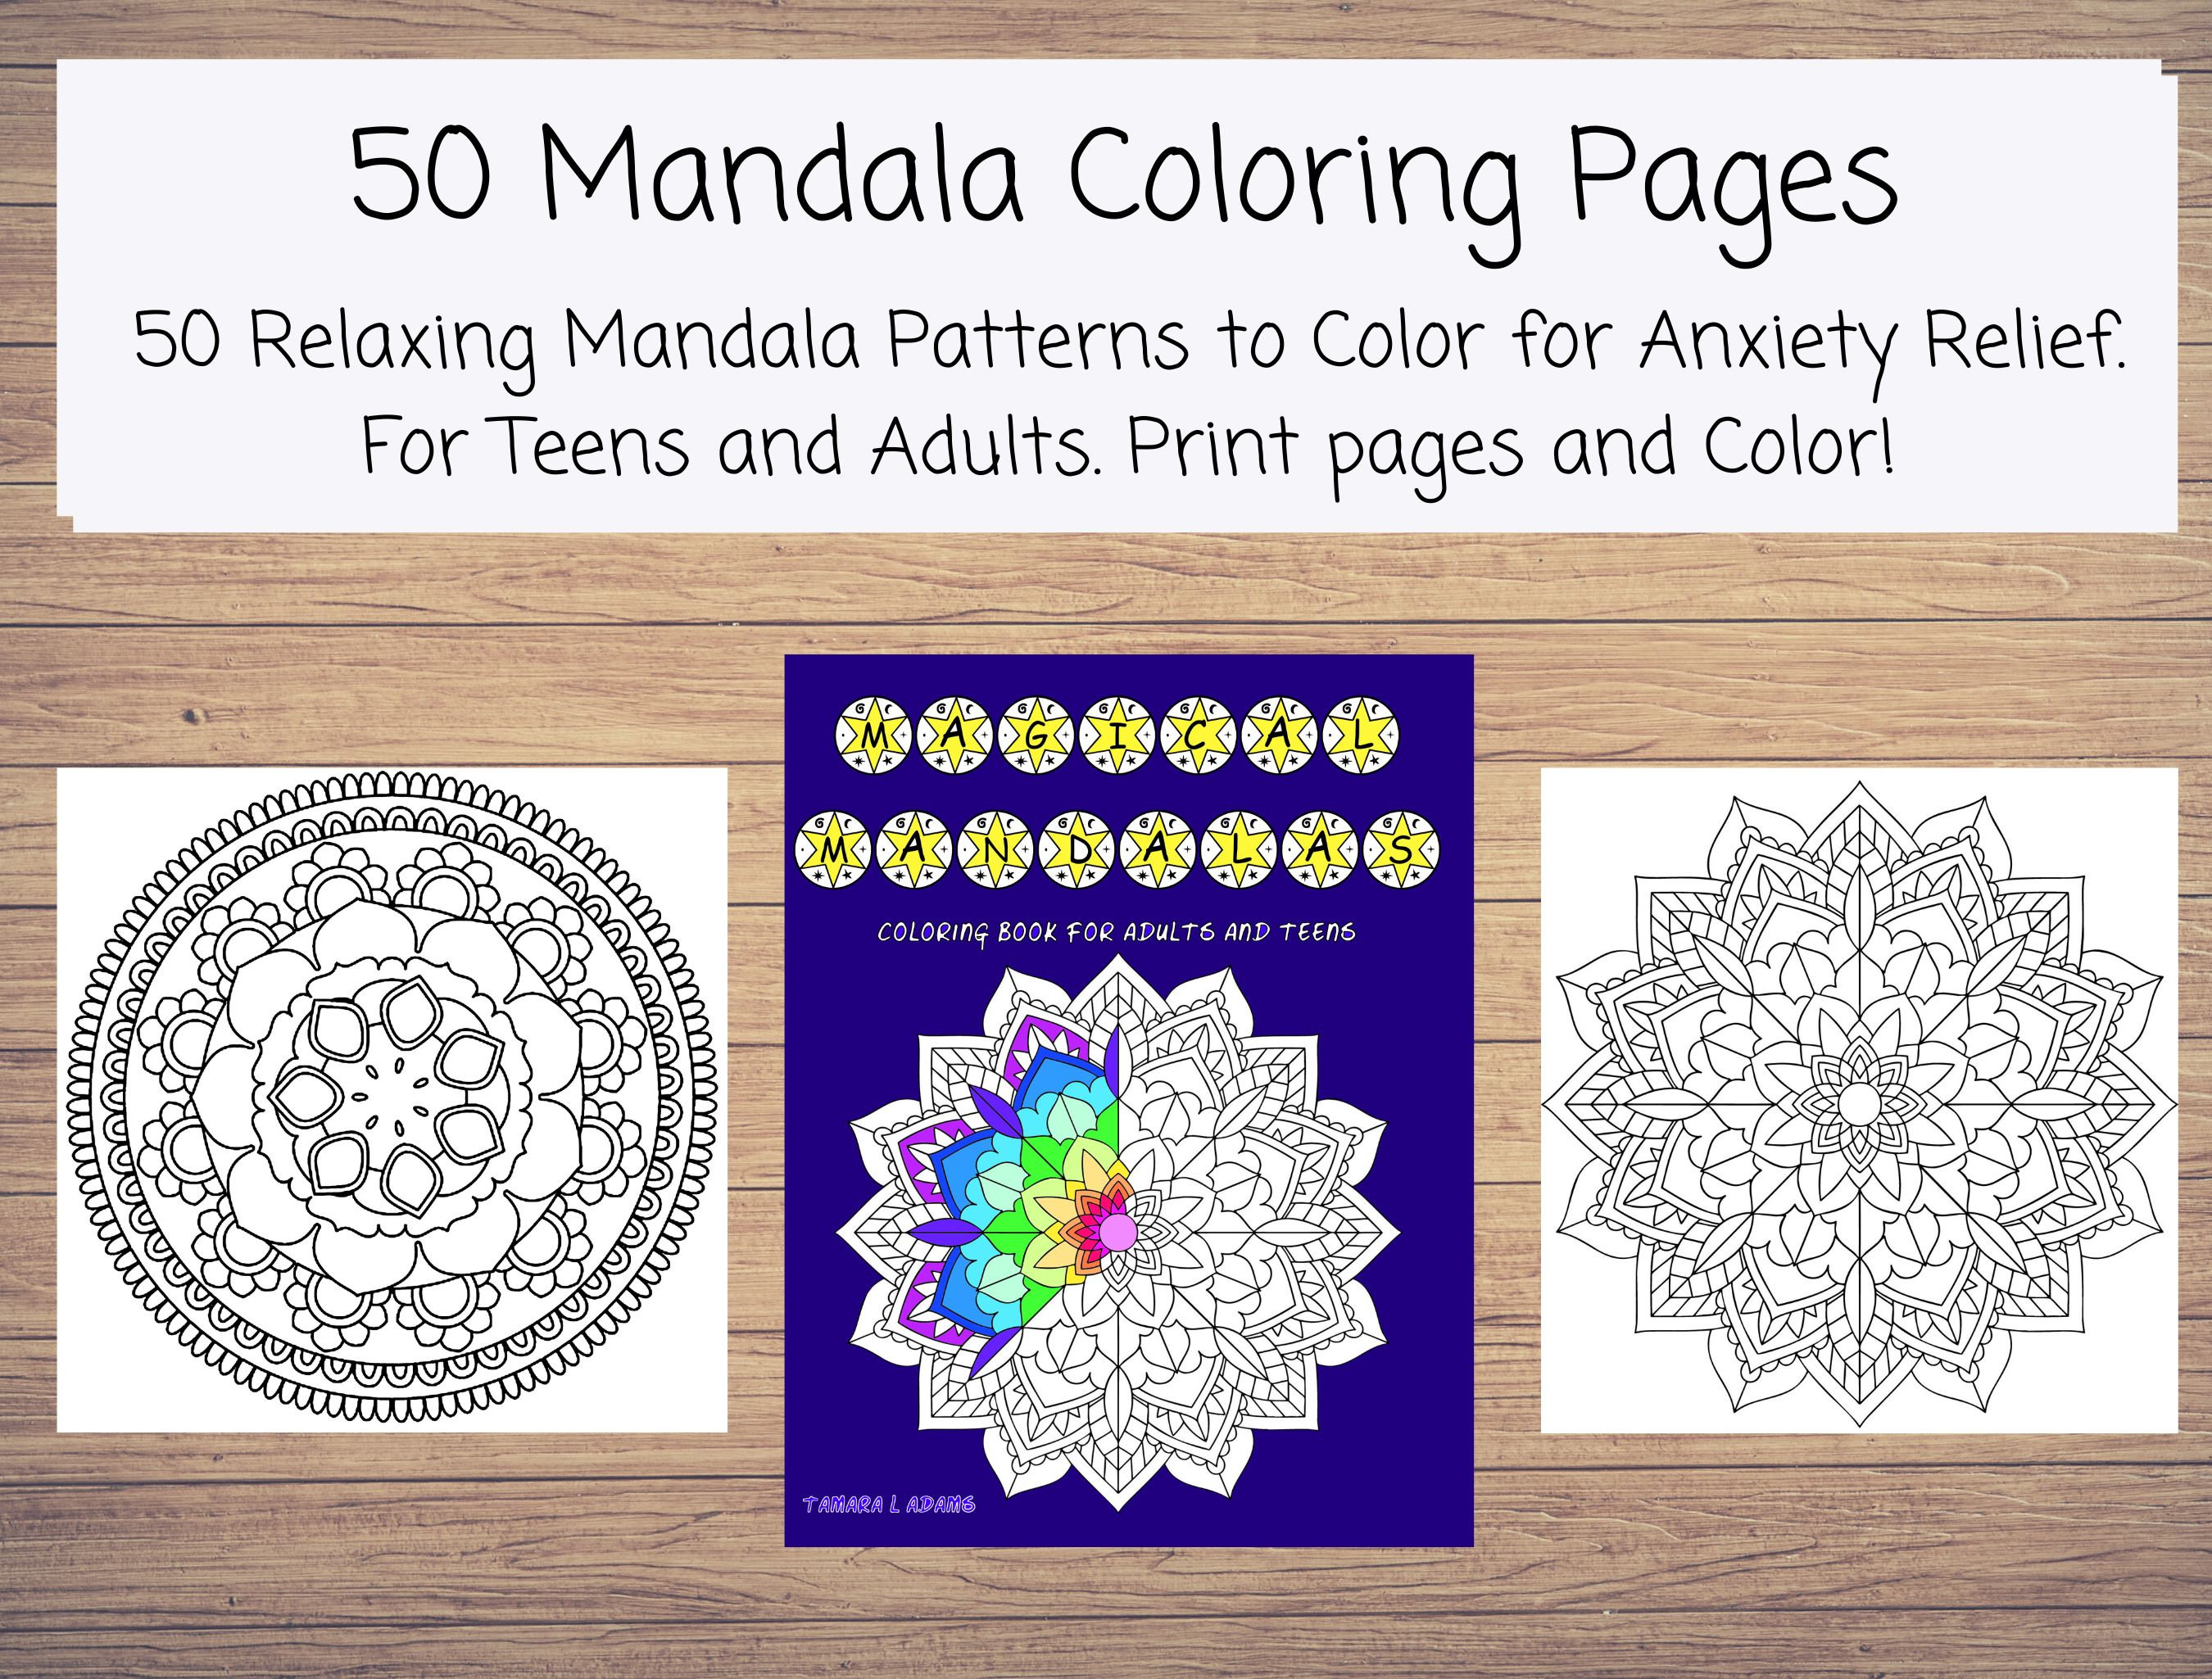 50 Amazing Mandala Coloring Book Adults Relaxation: An Adult Coloring Book  with Fun, Easy, and Relaxing Coloring Pages (Paperback)